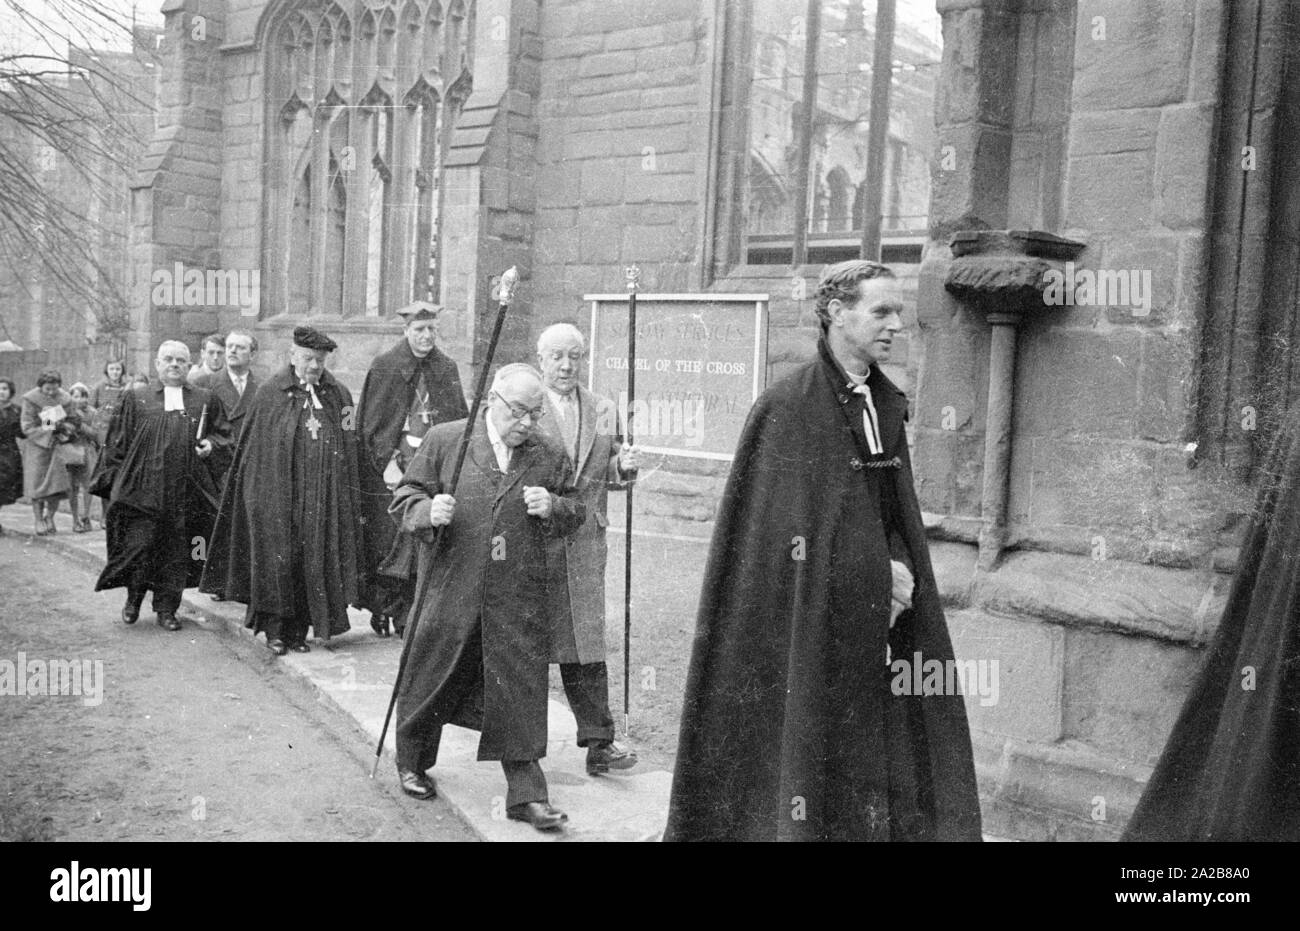 The German bishop, Otto Dibelius (with black beret), participates at the groundbreaking ceremony  of the 'International Center for Reconciliation' in the ruin of the destroyed St Michael's Cathedral. On the right, Reverend Bill Williams, the pastor of the destroyed cathedral. Stock Photo